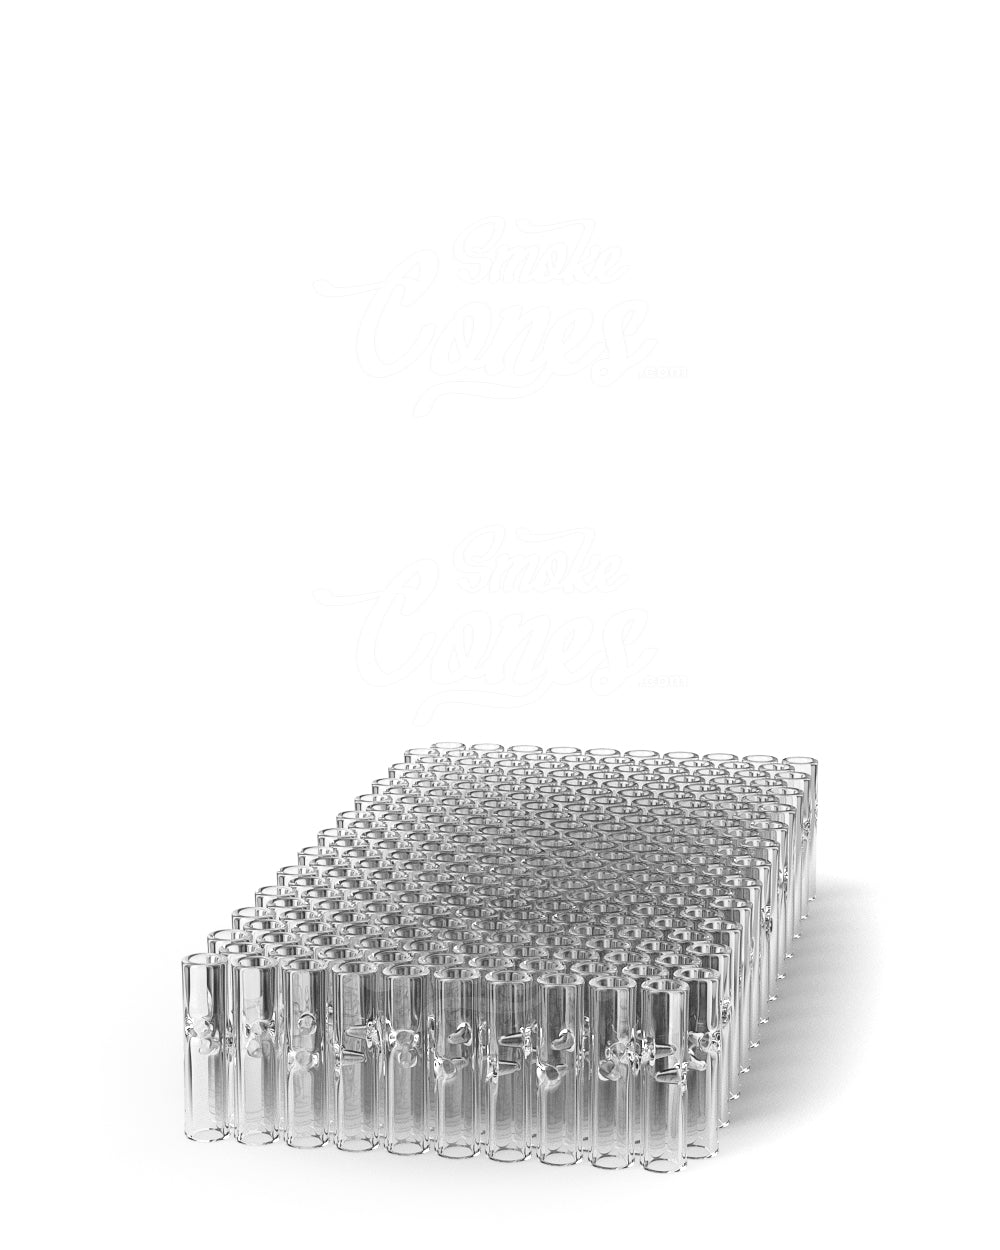 9mm Notched Glass Smoking Filter Tips 175/Box